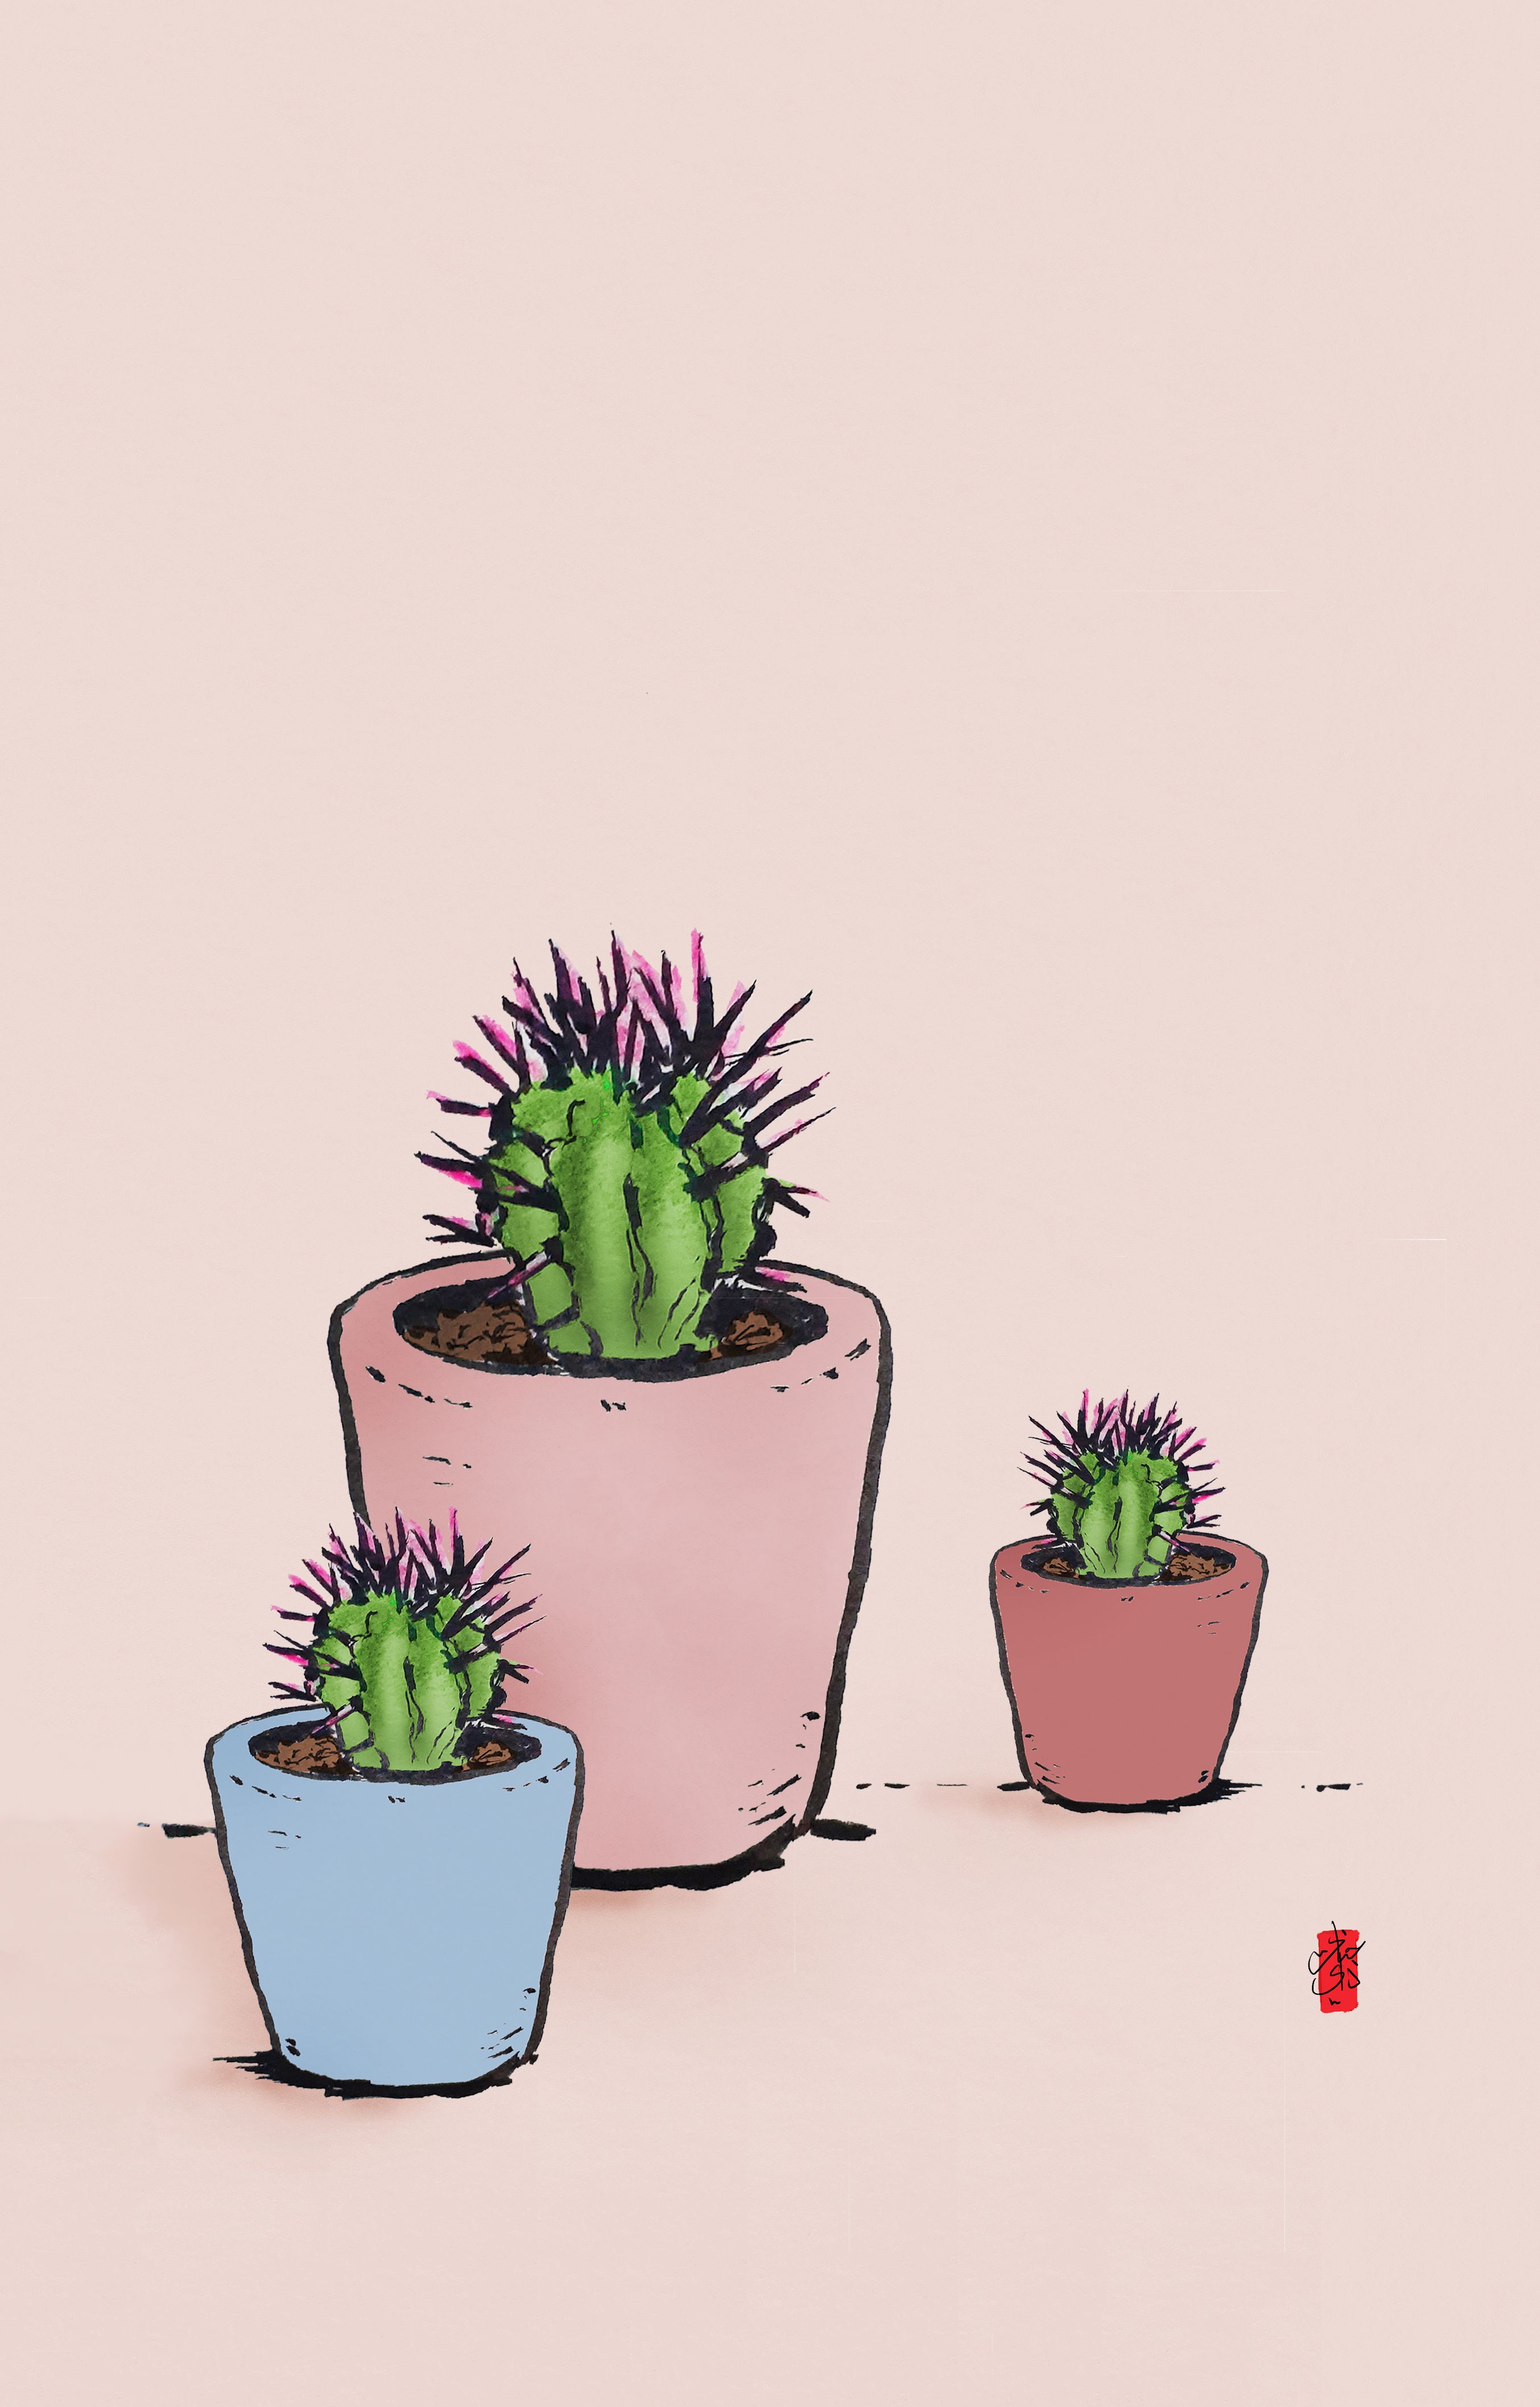 Three cactus plants of varying sizes in pots. - Cactus